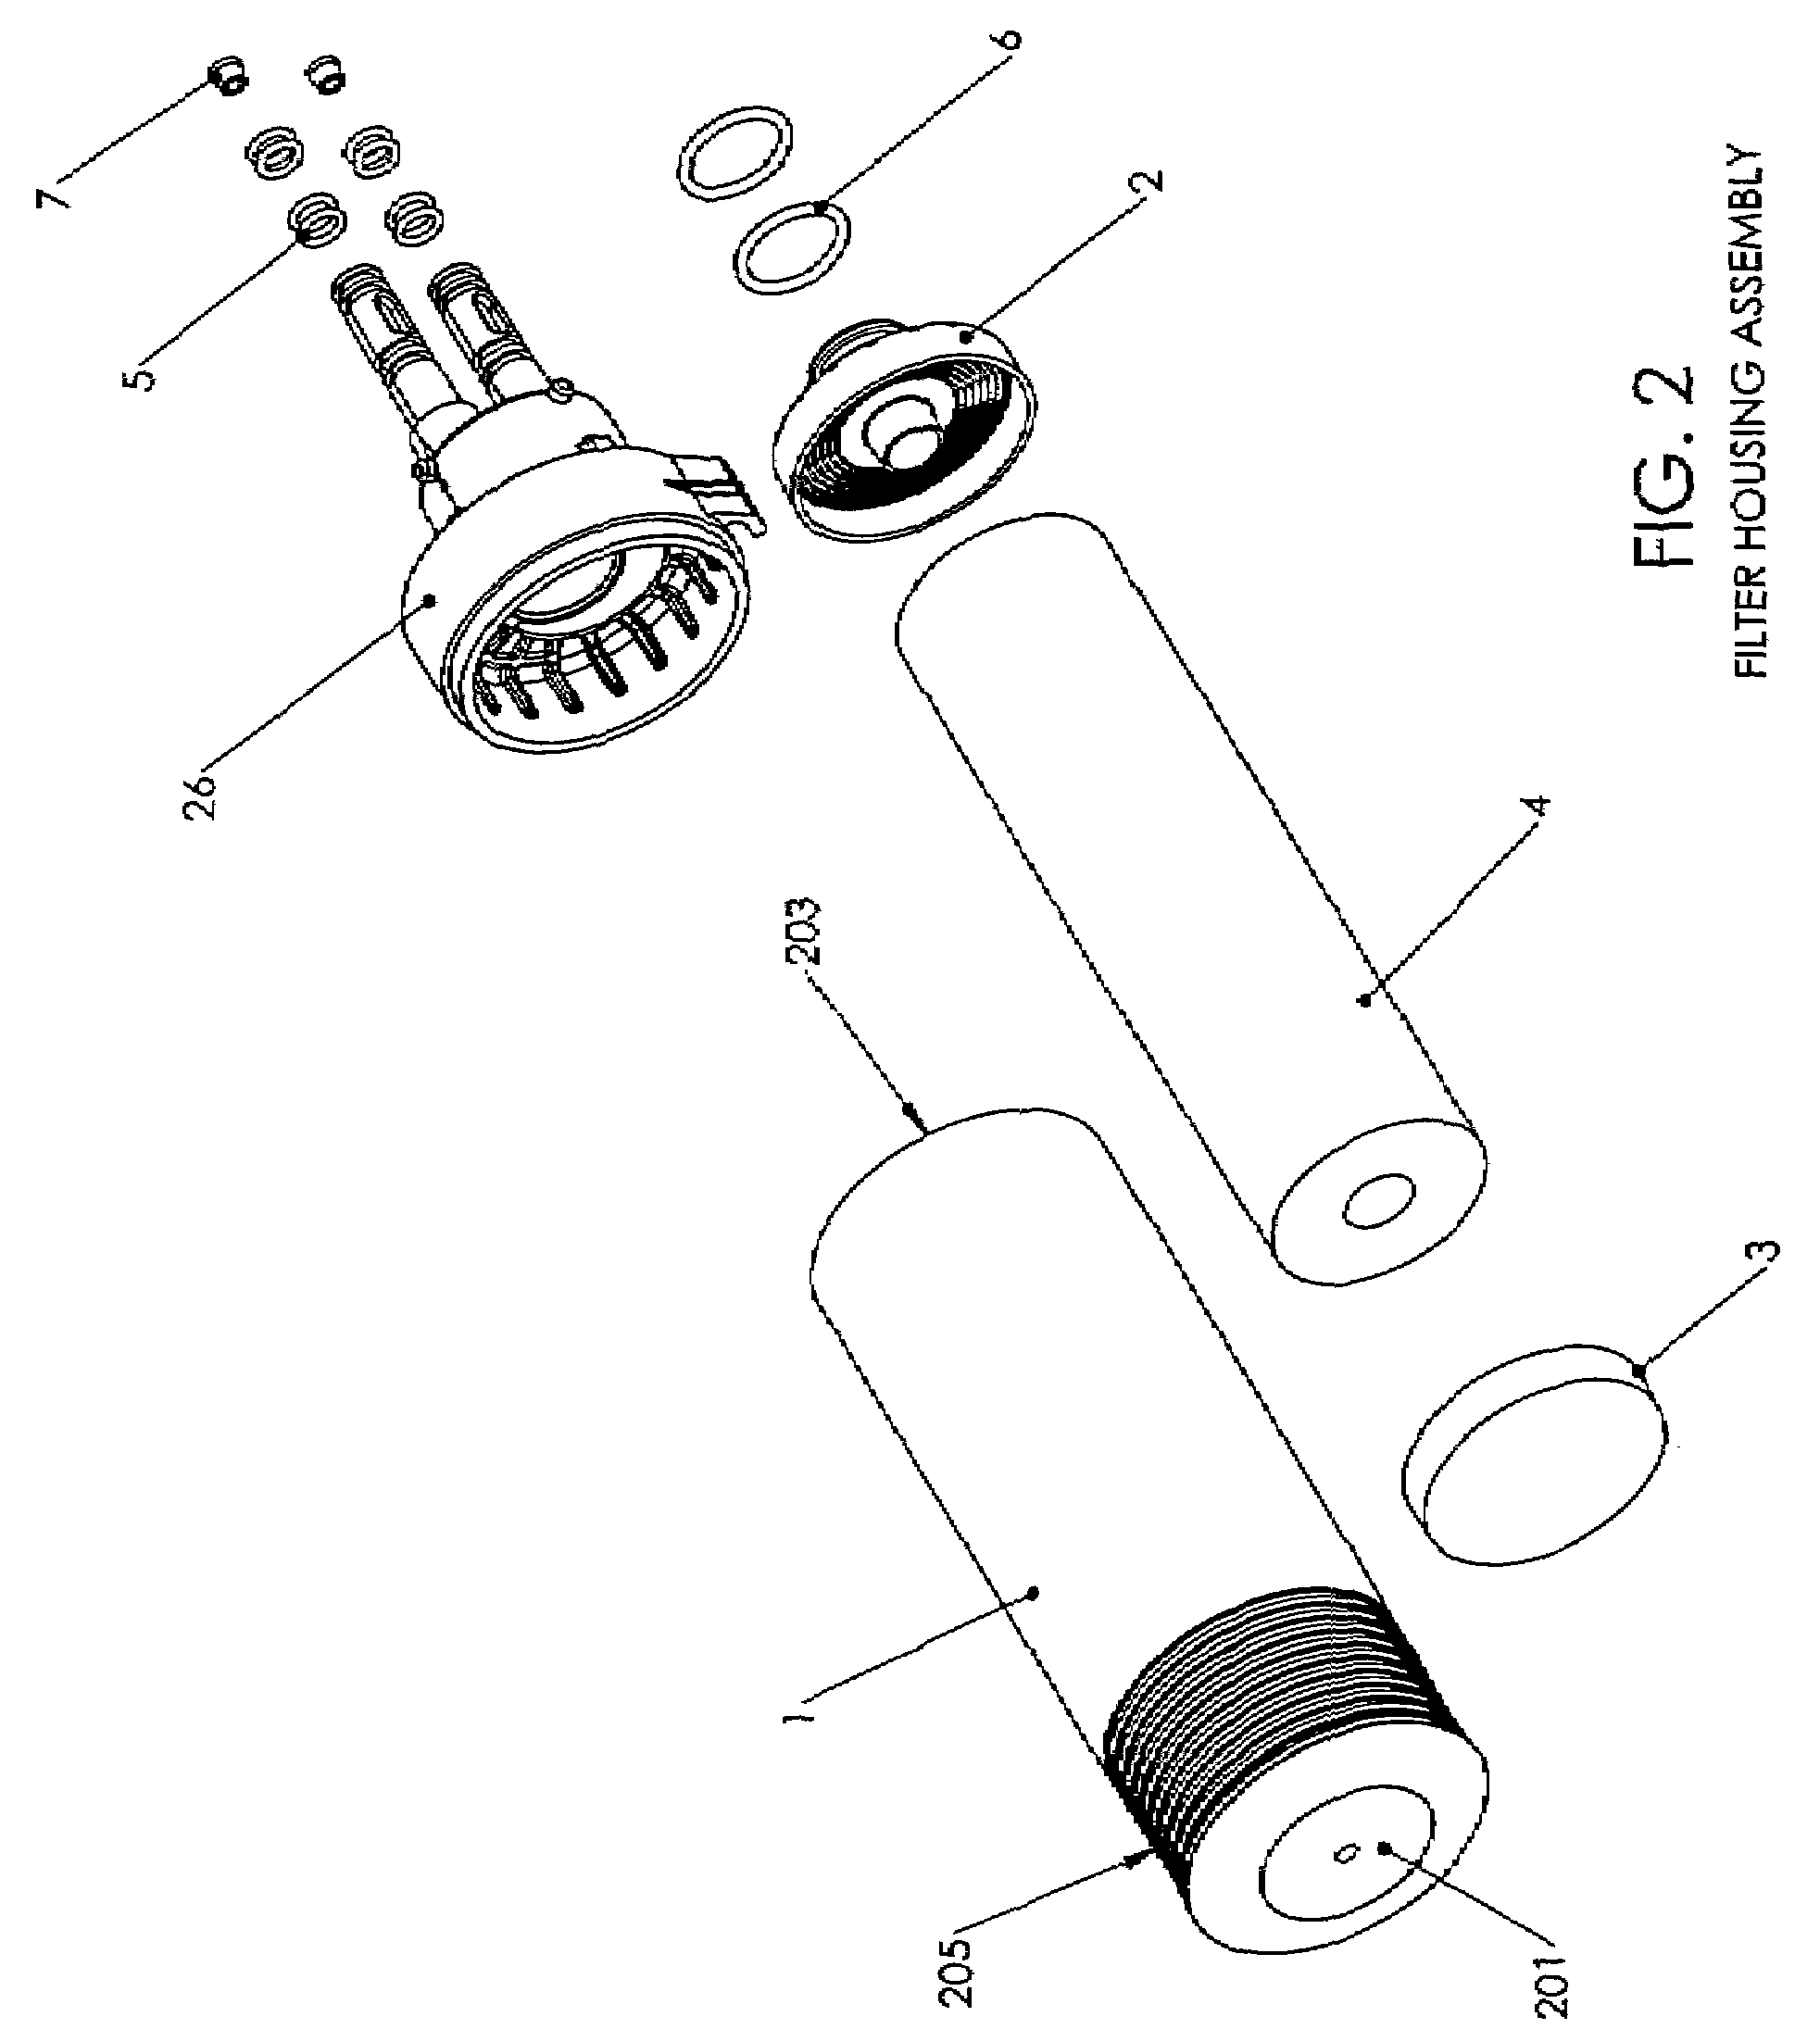 Filter housing apparatus with roatating filter replacement mechanism